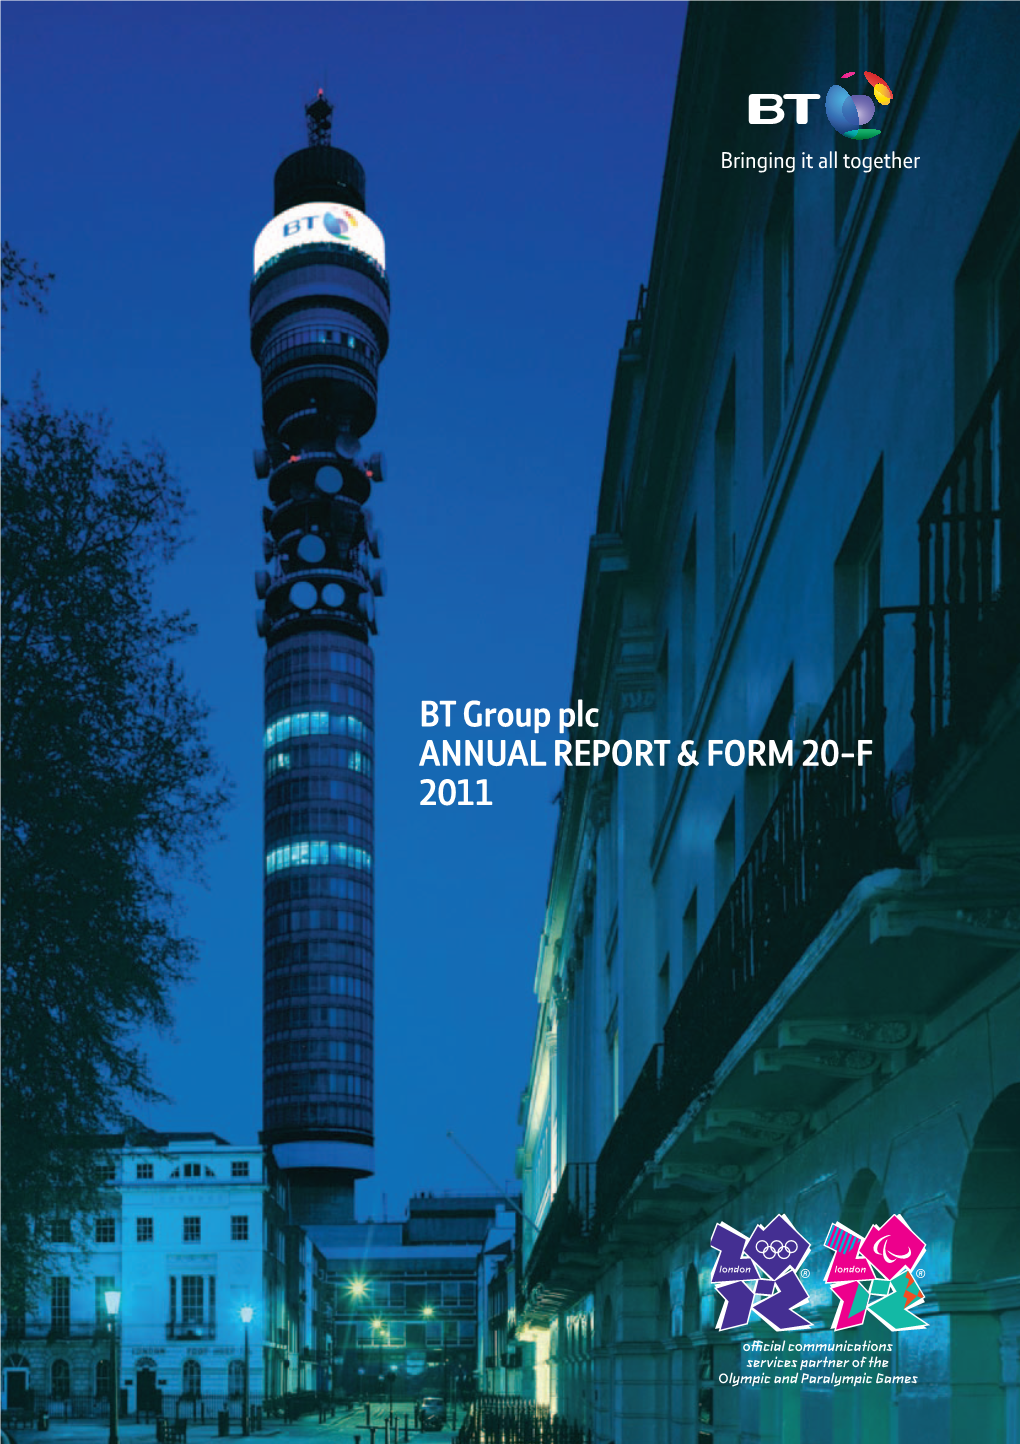 BT Group Plc ANNUAL REPORT & FORM 20-F 2011